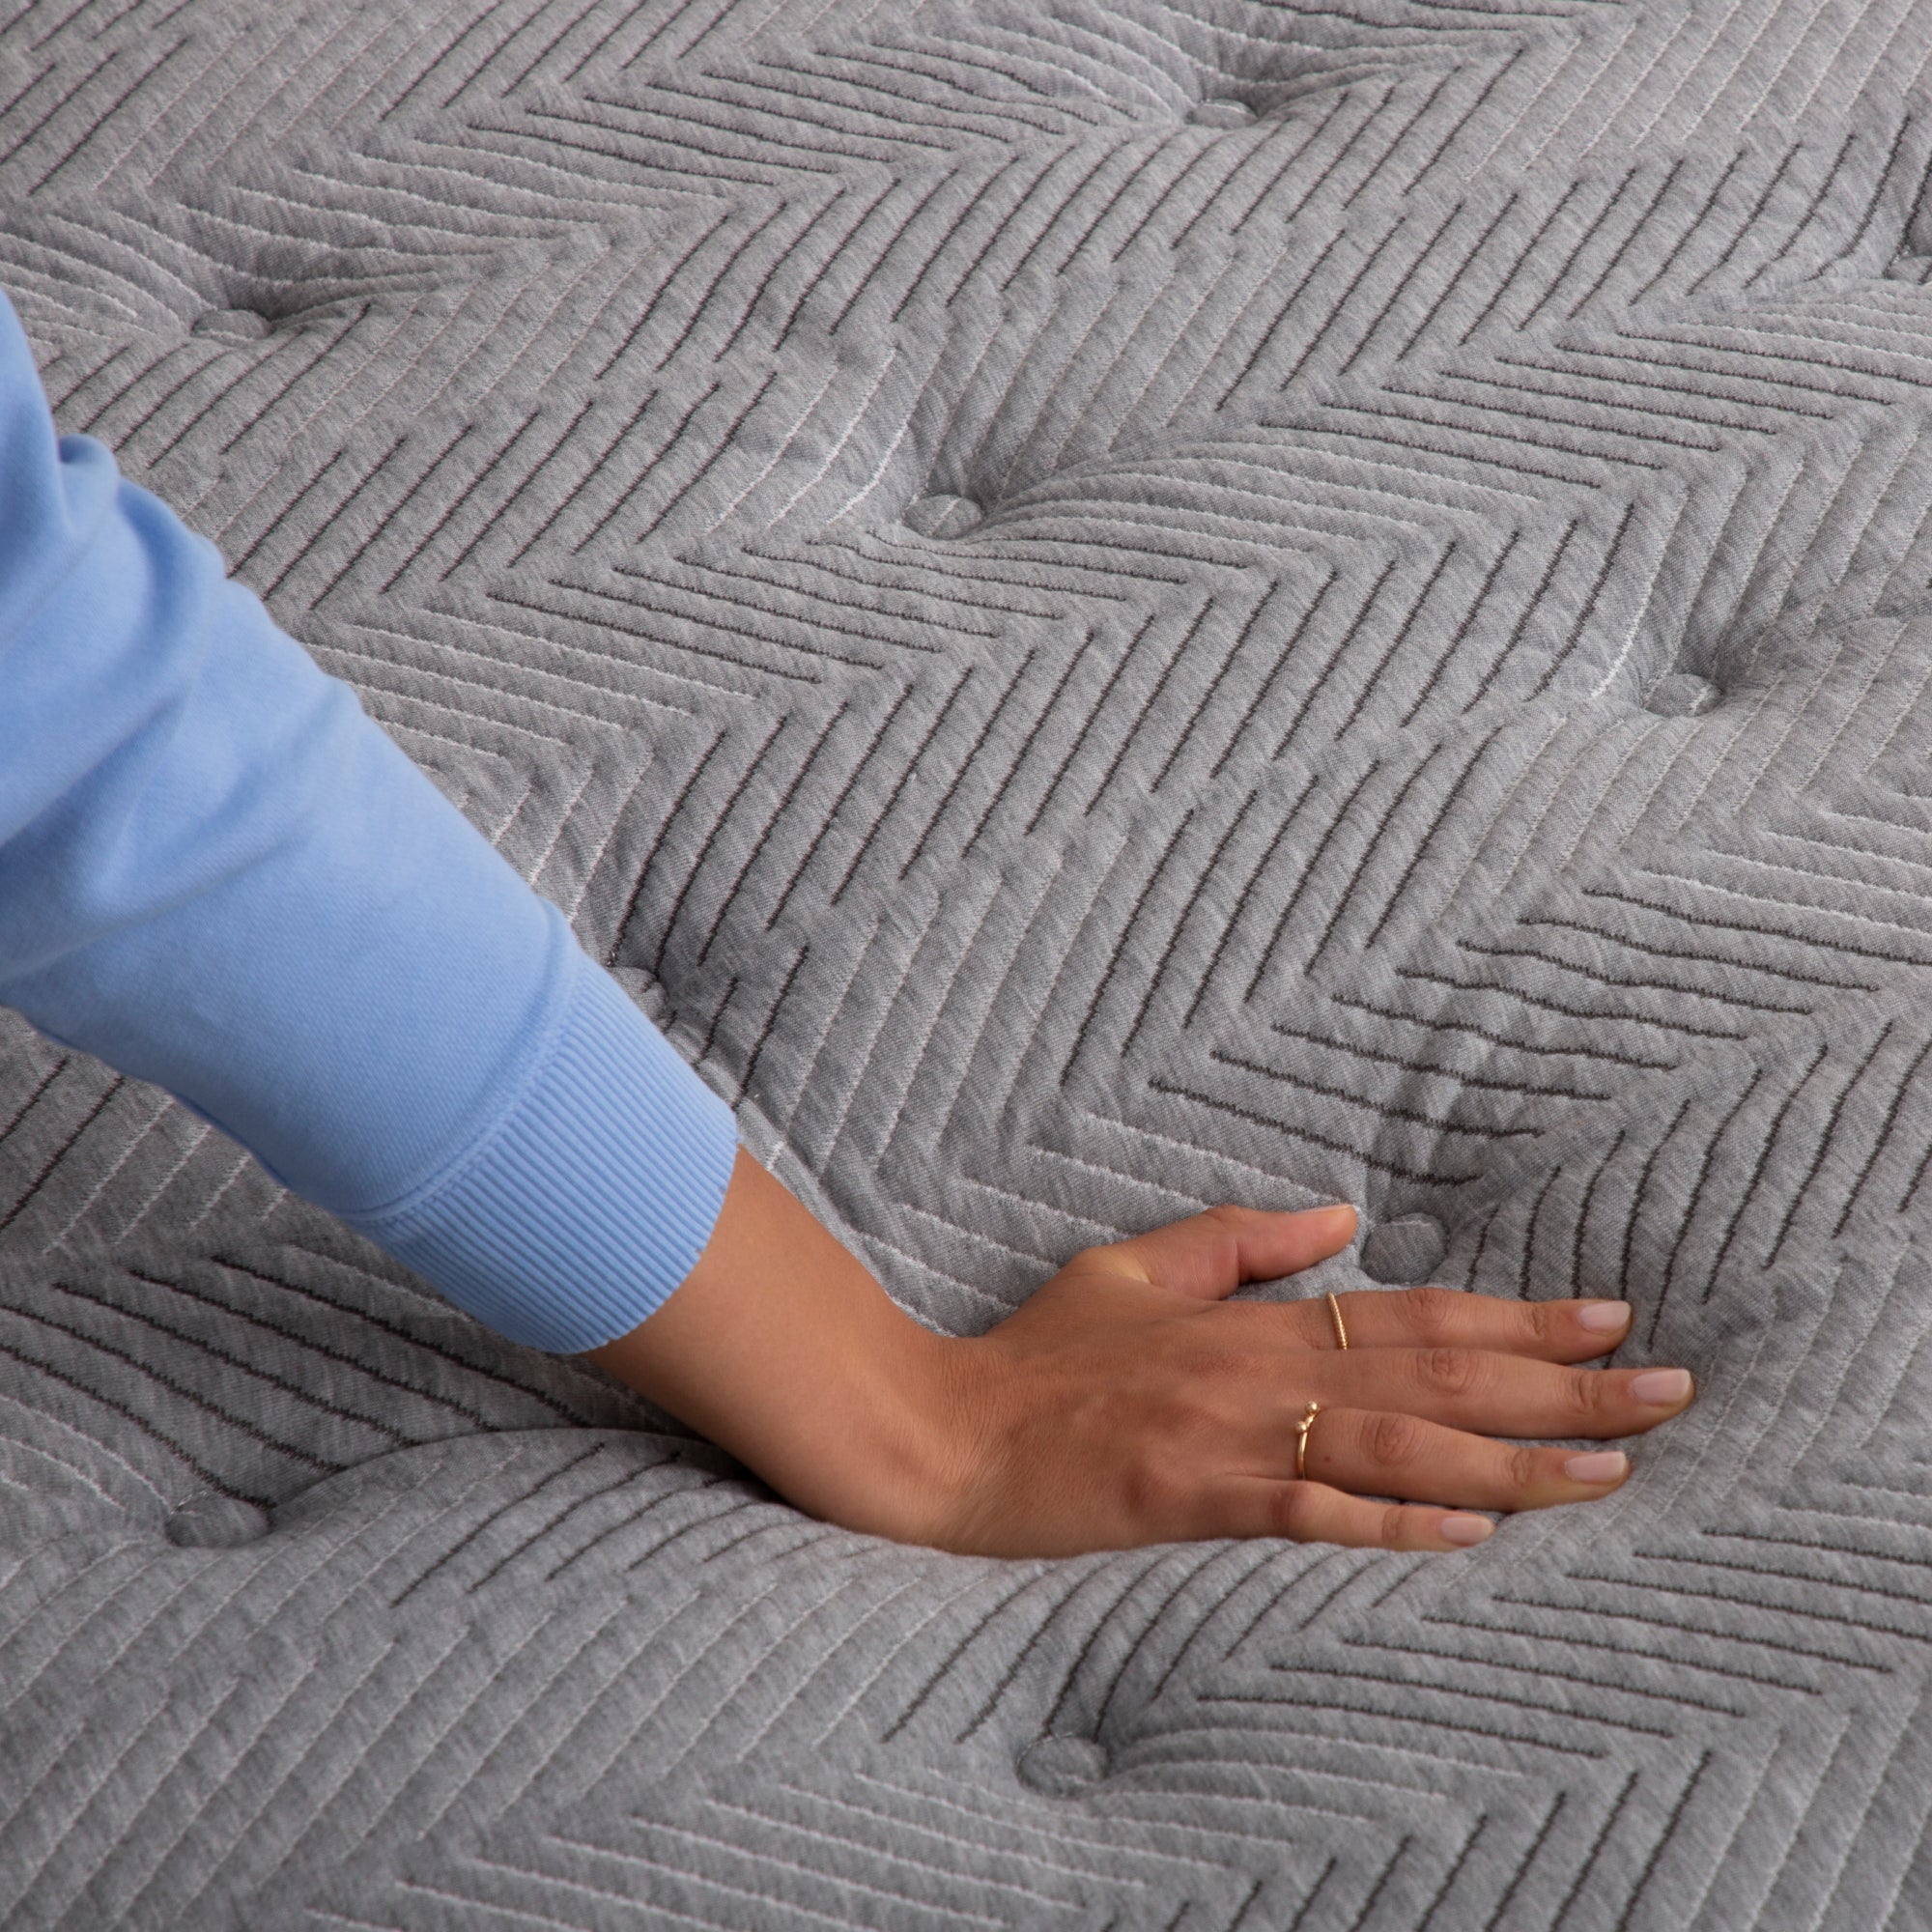 Hand pressing down on quilted plush mattress